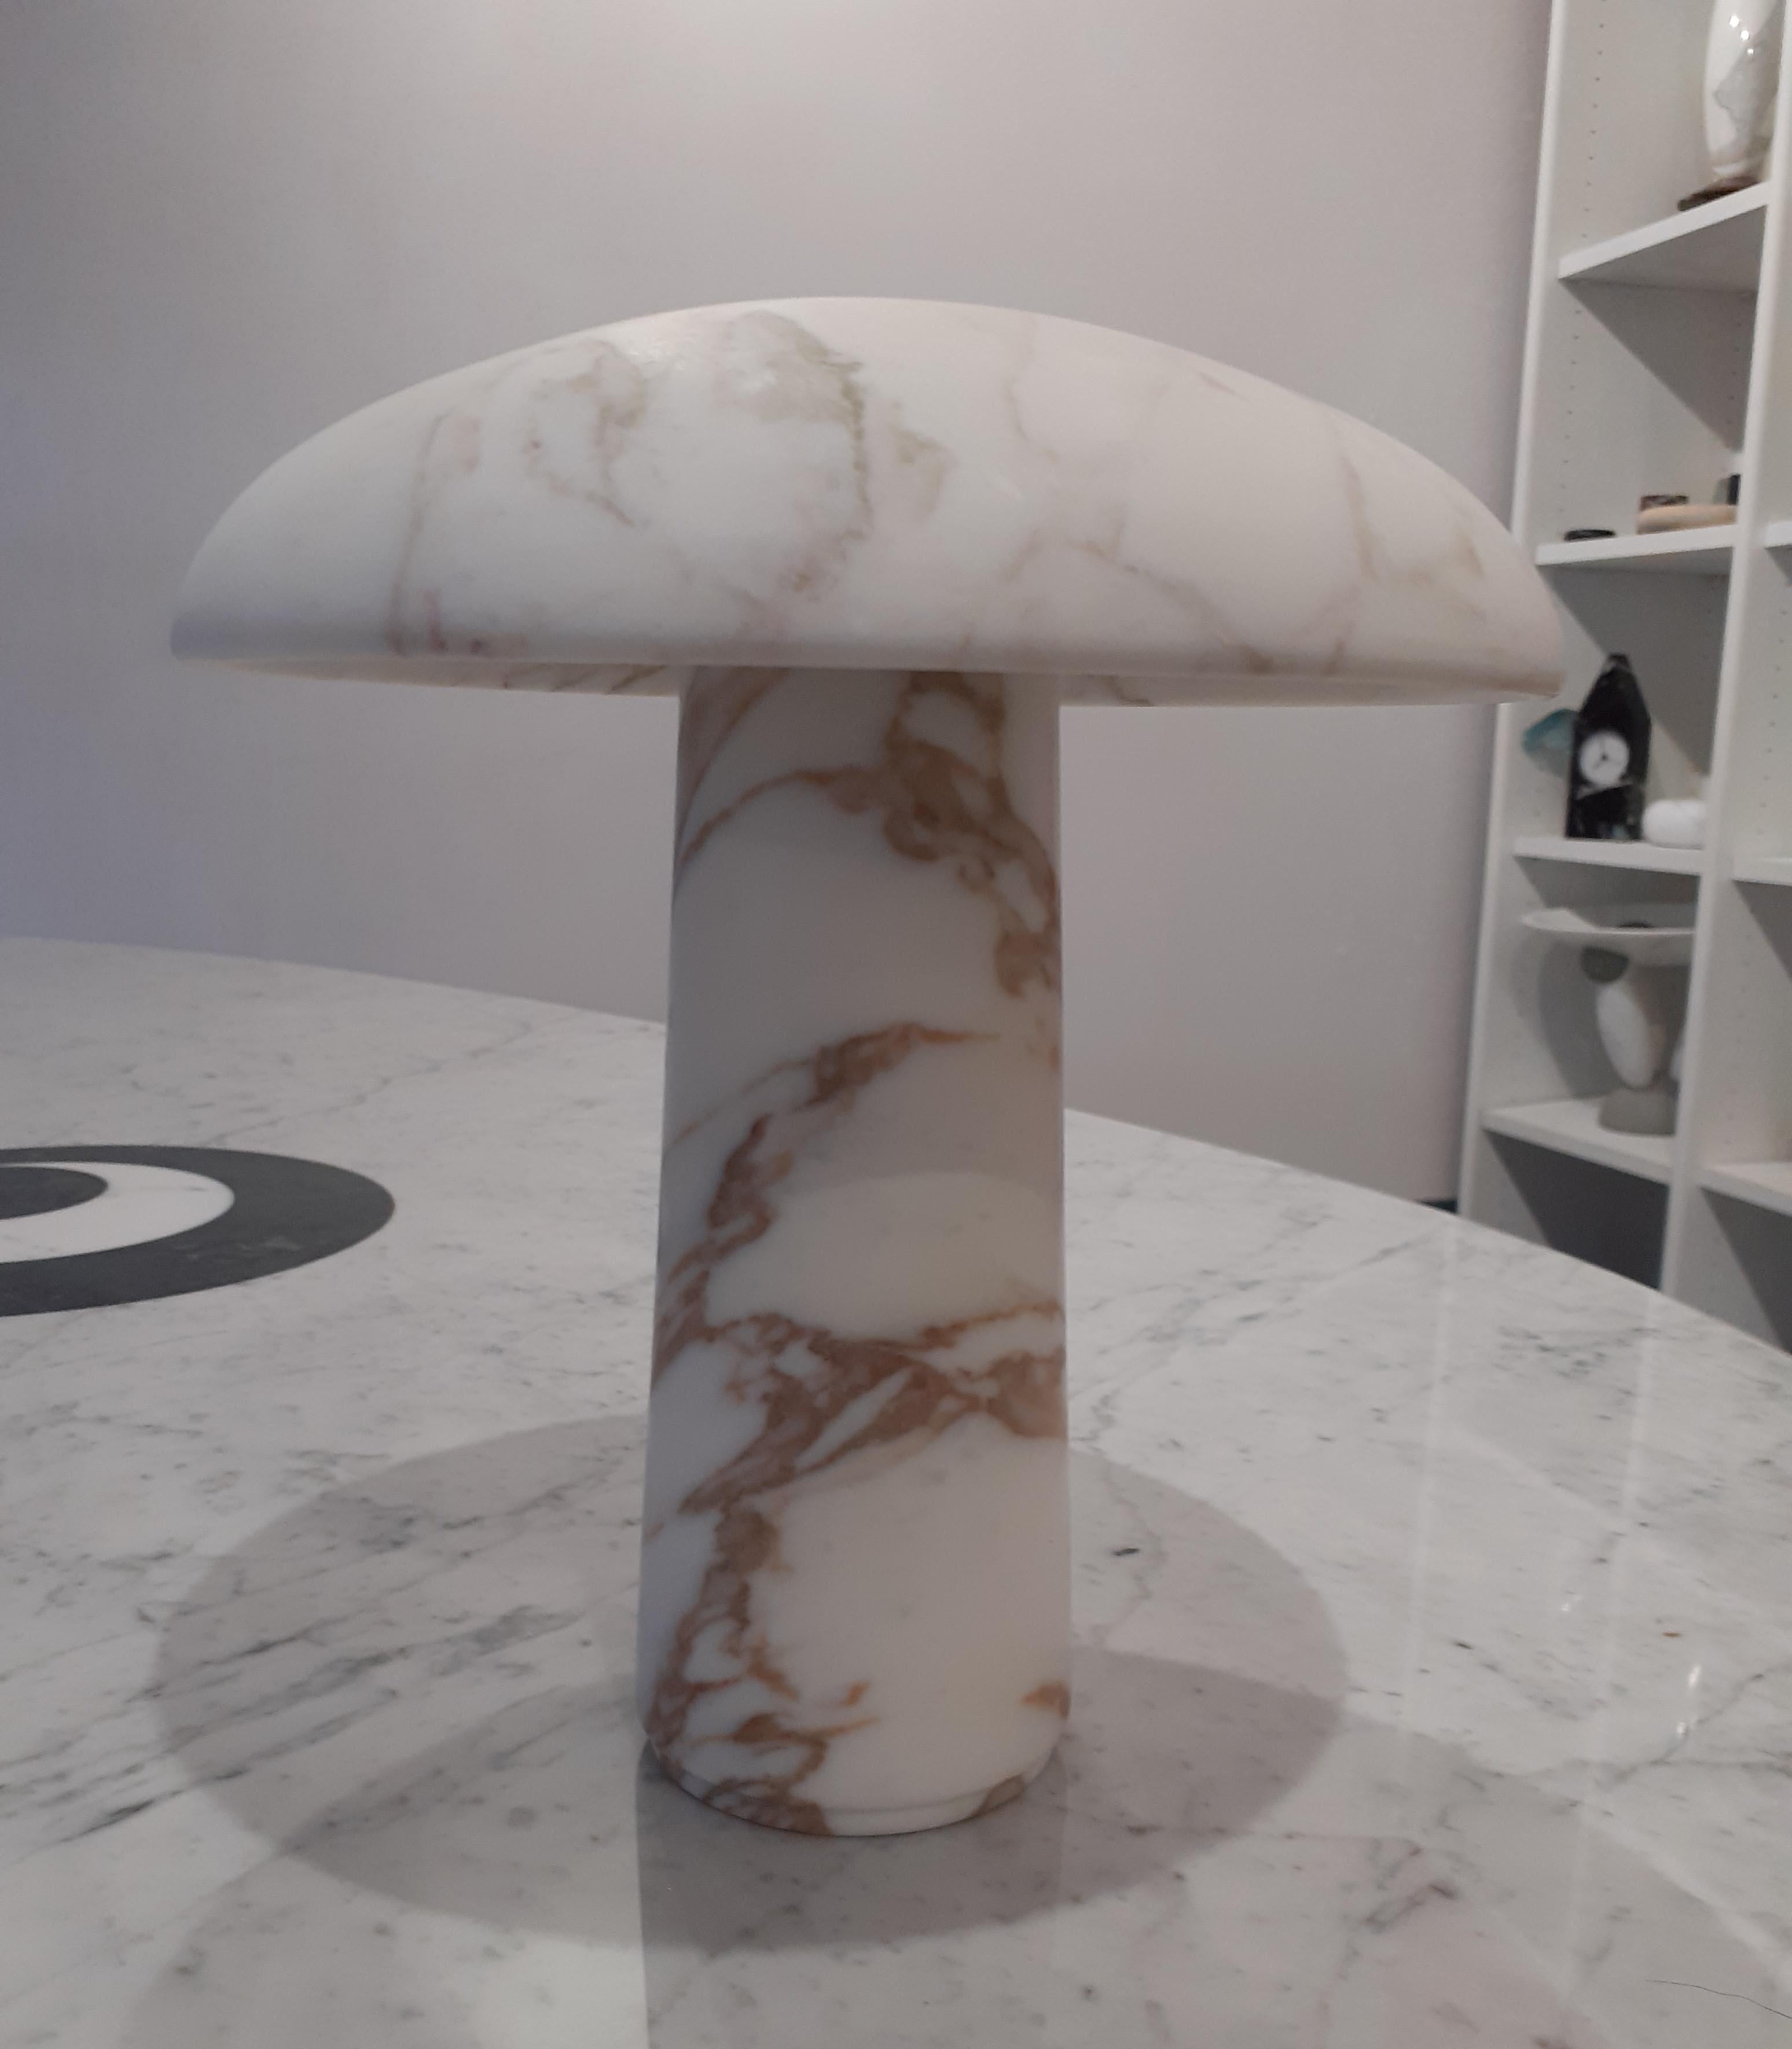 Mushroom marble lamp designed by designer Marco Marino.
Available in four different material: Bianco Carrara, Calacatta, Calacatta Vagli & Arabescato with led lighting.
Size: cm 22 x 22 H
Materials: Bianco Carrara – Calacatta – Calacatta Vagli –